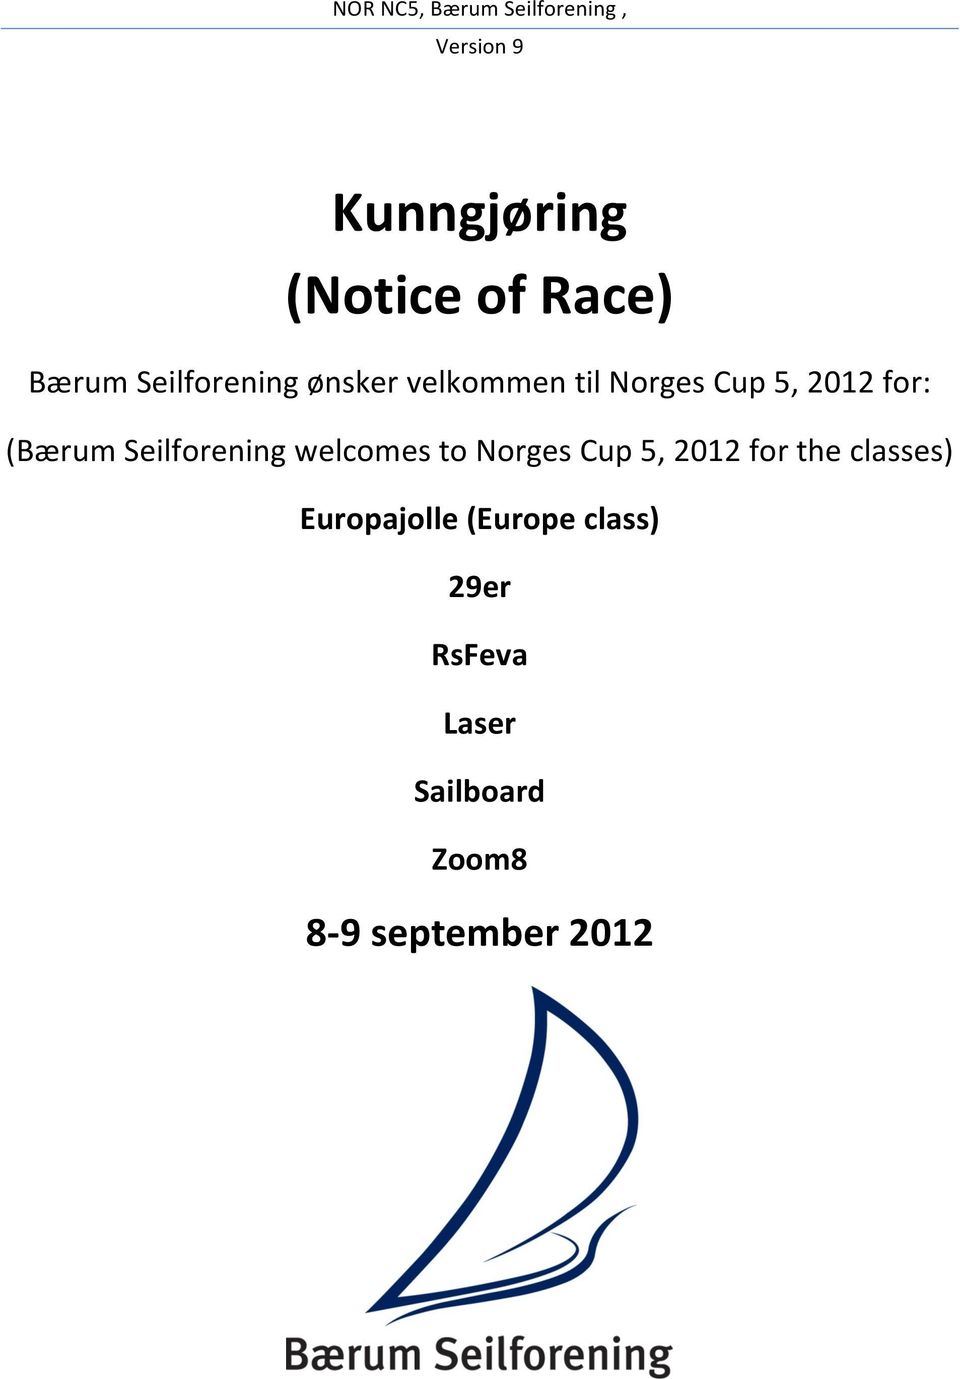 welcomes to Norges Cup 5, 2012 for the classes) (Europe